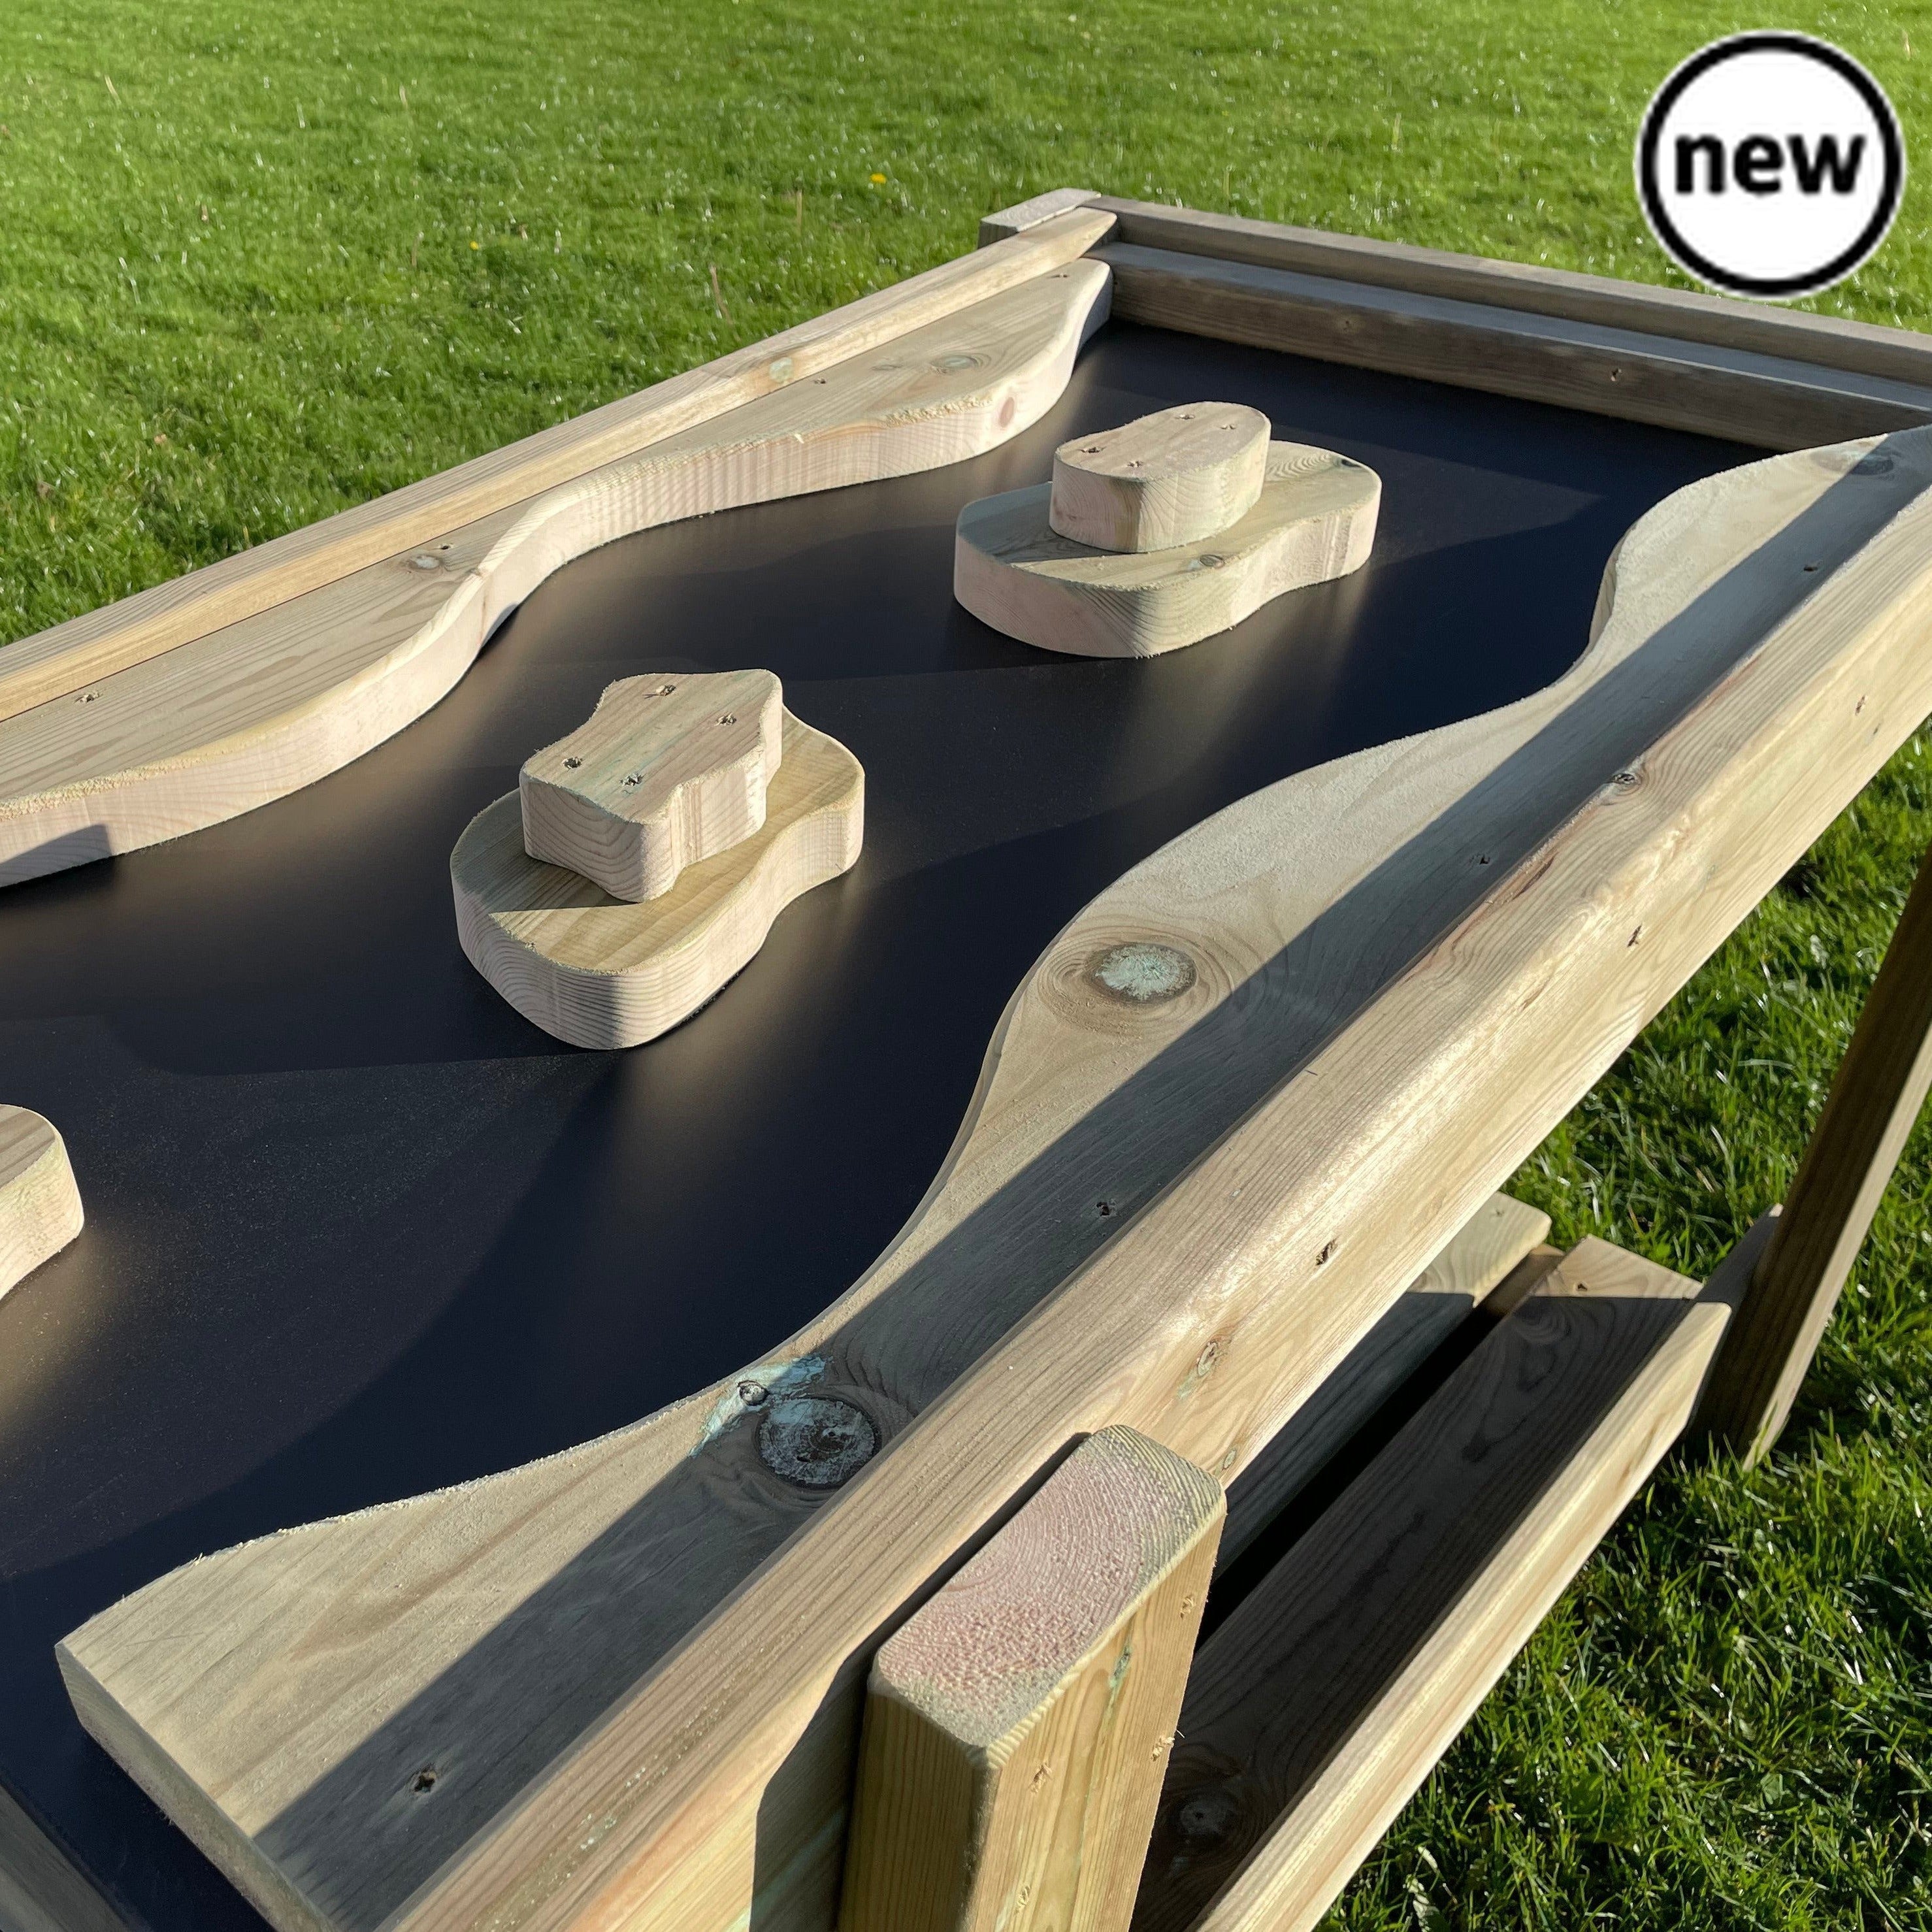 Outdoor Water Chute and Tuff Tray Table, Educational and fun! This exciting new resource will keep children entertained for hours, whilst providing them with educational benefits. An exciting way for children to learn about water fluidity as they watch the water run down the chute. With islands placed as obstacles along the chute to separate water flow, this resource would be great to use in a science lesson! A fun way to encourage teamwork on the playground. Made from sustainable FSC Pressure Treated Redwo